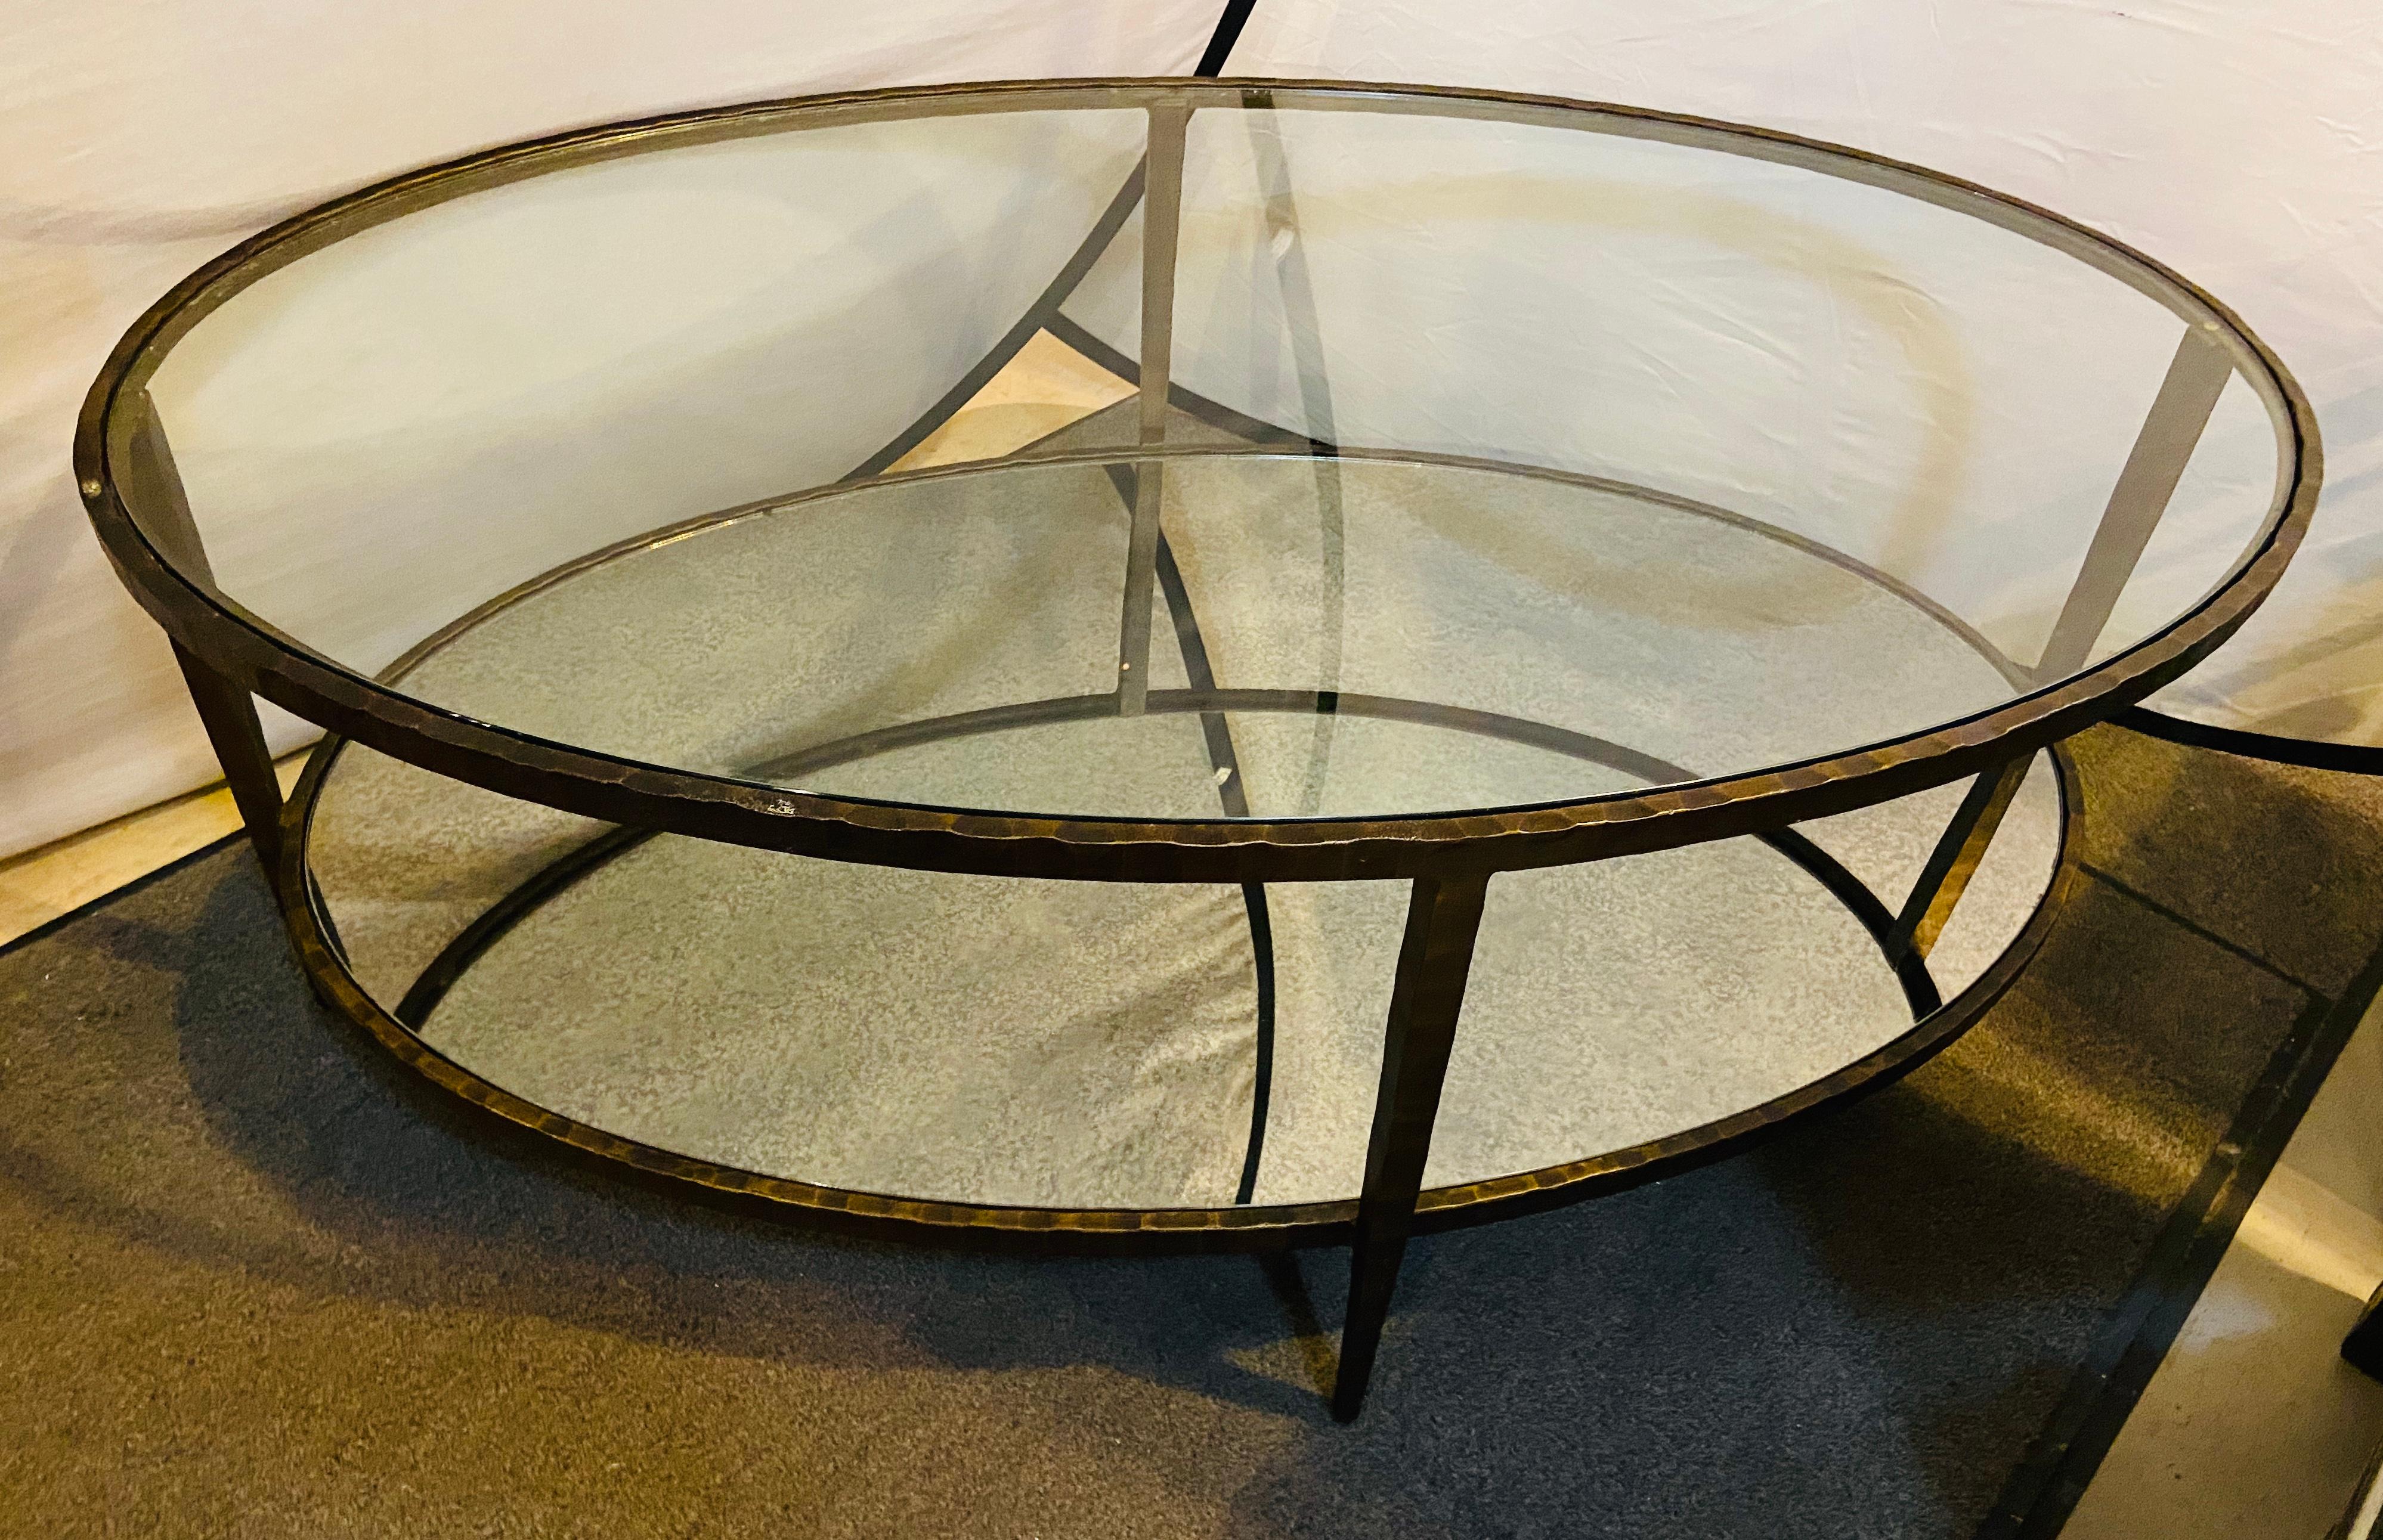 An oval antiqued metal coffee / low table.
The table features a glass top and a distressed mirror lower shelve. This Hollywood Regency style table will certainly add style and sophistication to your living environment.
  